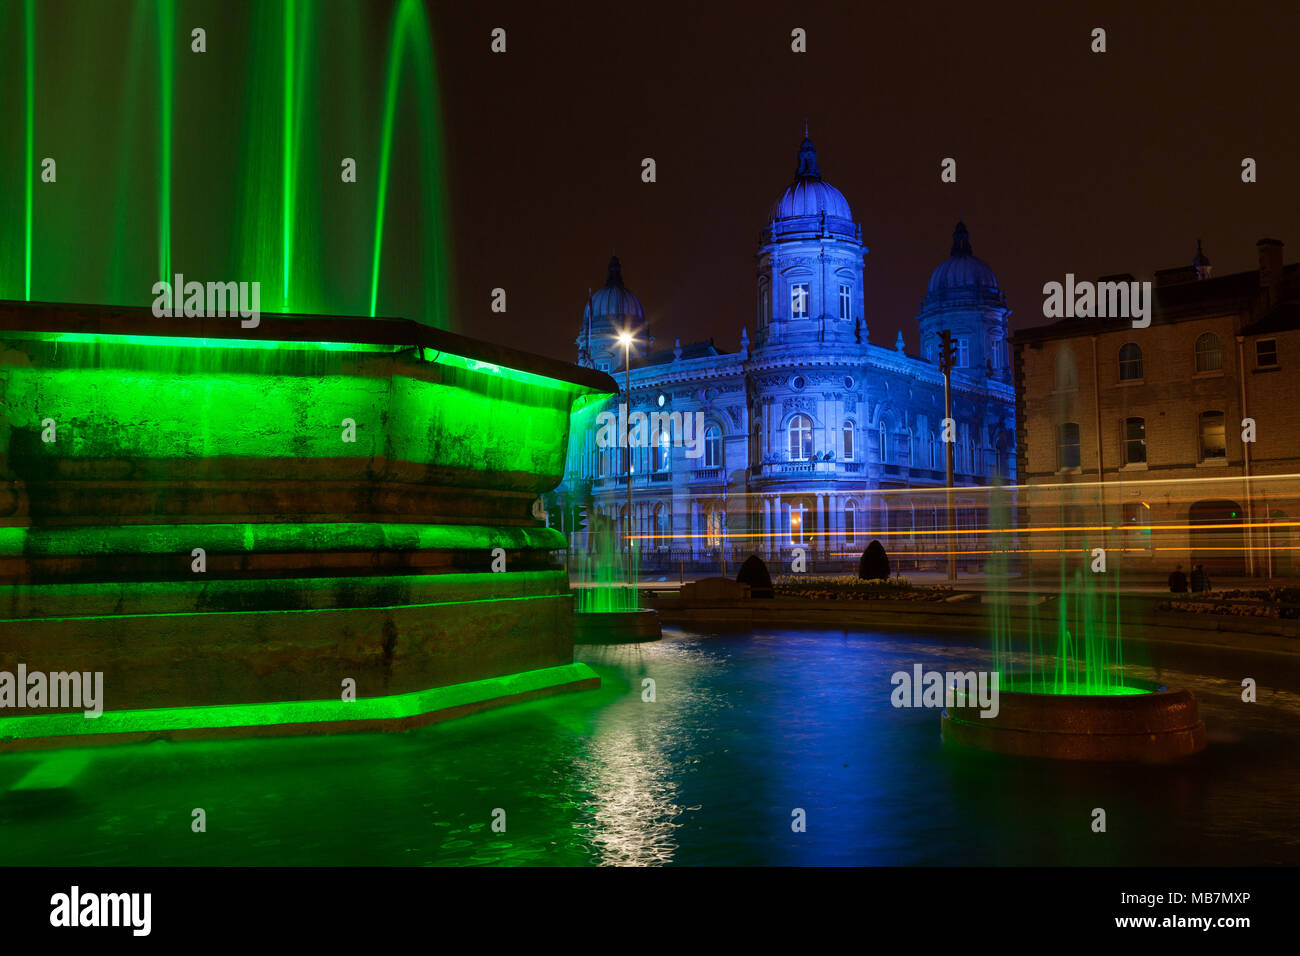 Hull, UK. 7th April, 2018. UK News: Hull's Maritime Museum and Queens Gardens Fountain, illuminated as part of the City's new 'Golden Hour' lighting installation, designed by artist Nayan Kulkarni. Hull, UK City of Culture 2017, East Yorkshire, UK. 7th April 2018. Credit: LEE BEEL/Alamy Live News Stock Photo